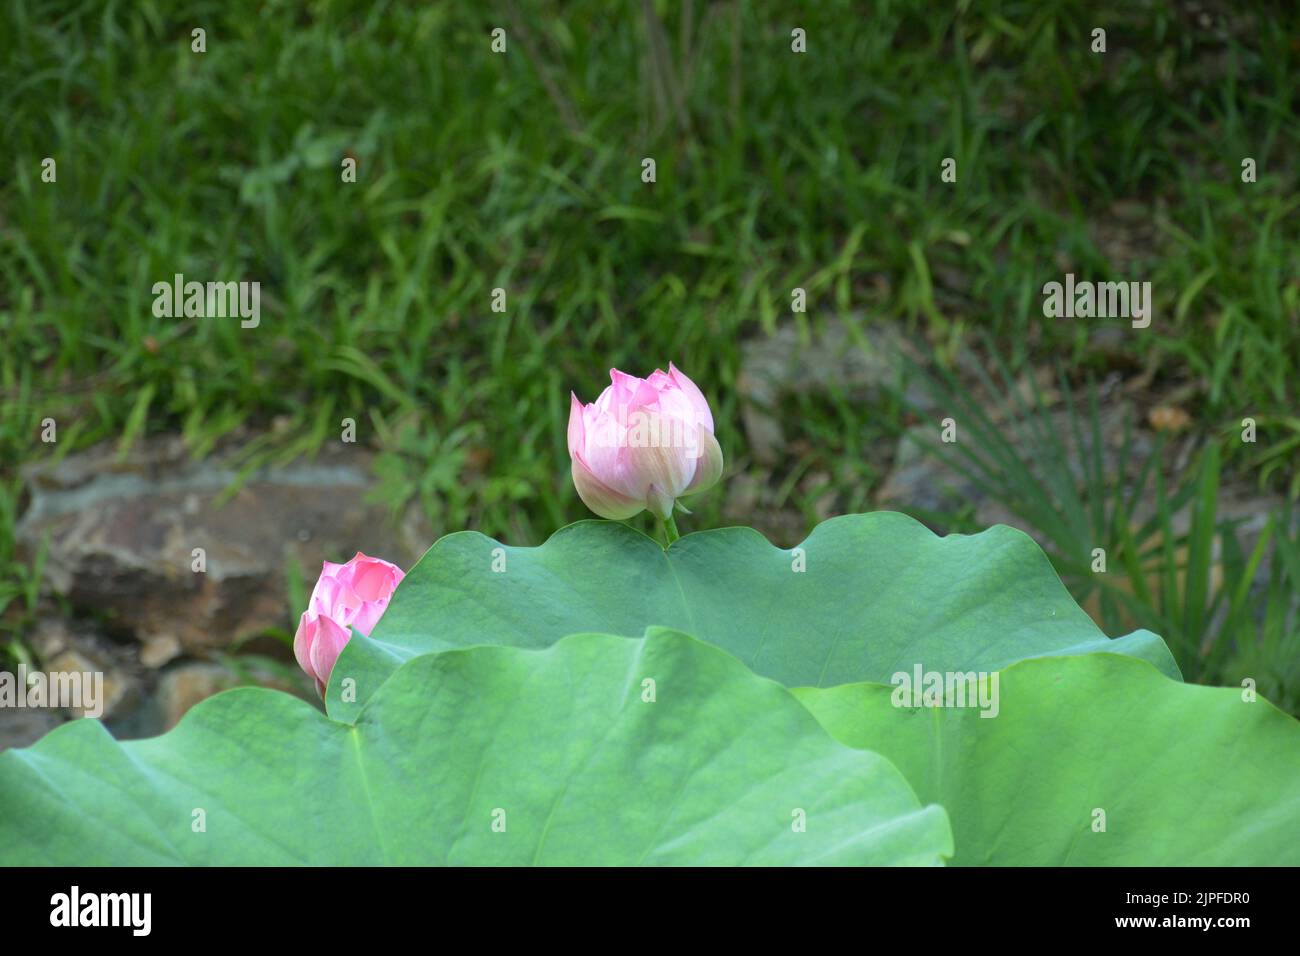 pink lotus flower bed ready to blossoms with green leaves Stock Photo